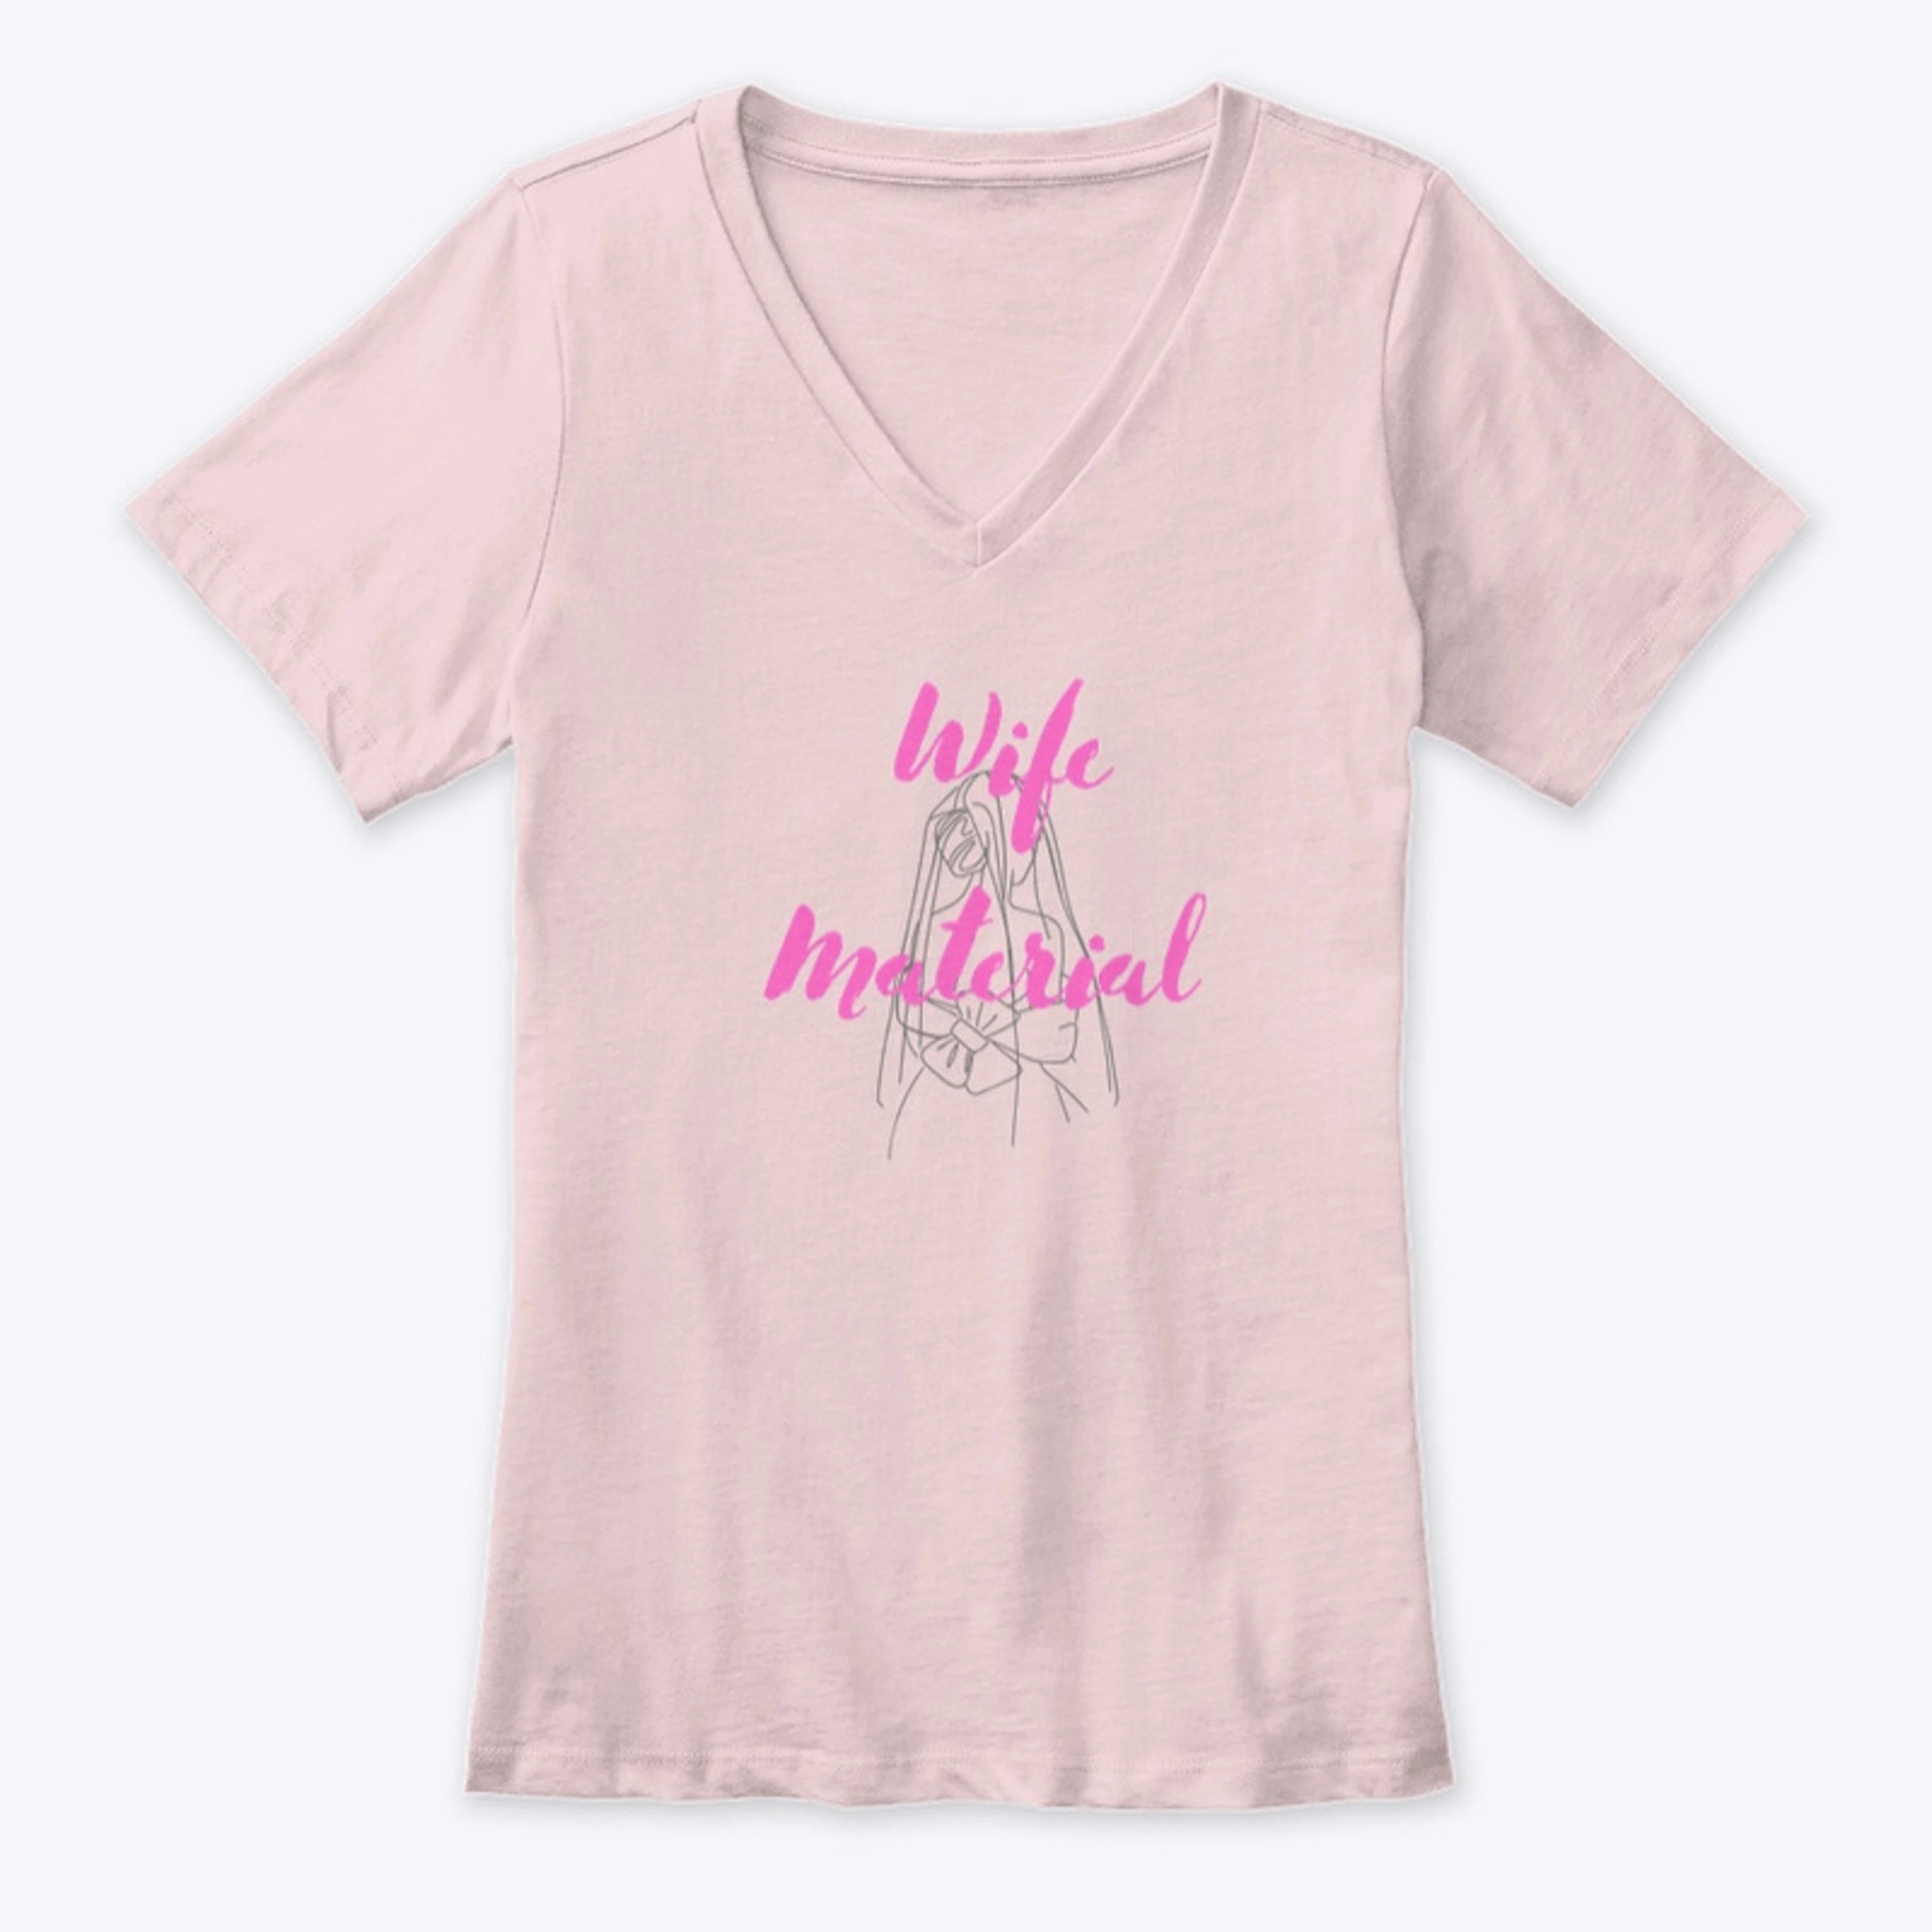 Wife Material Tee